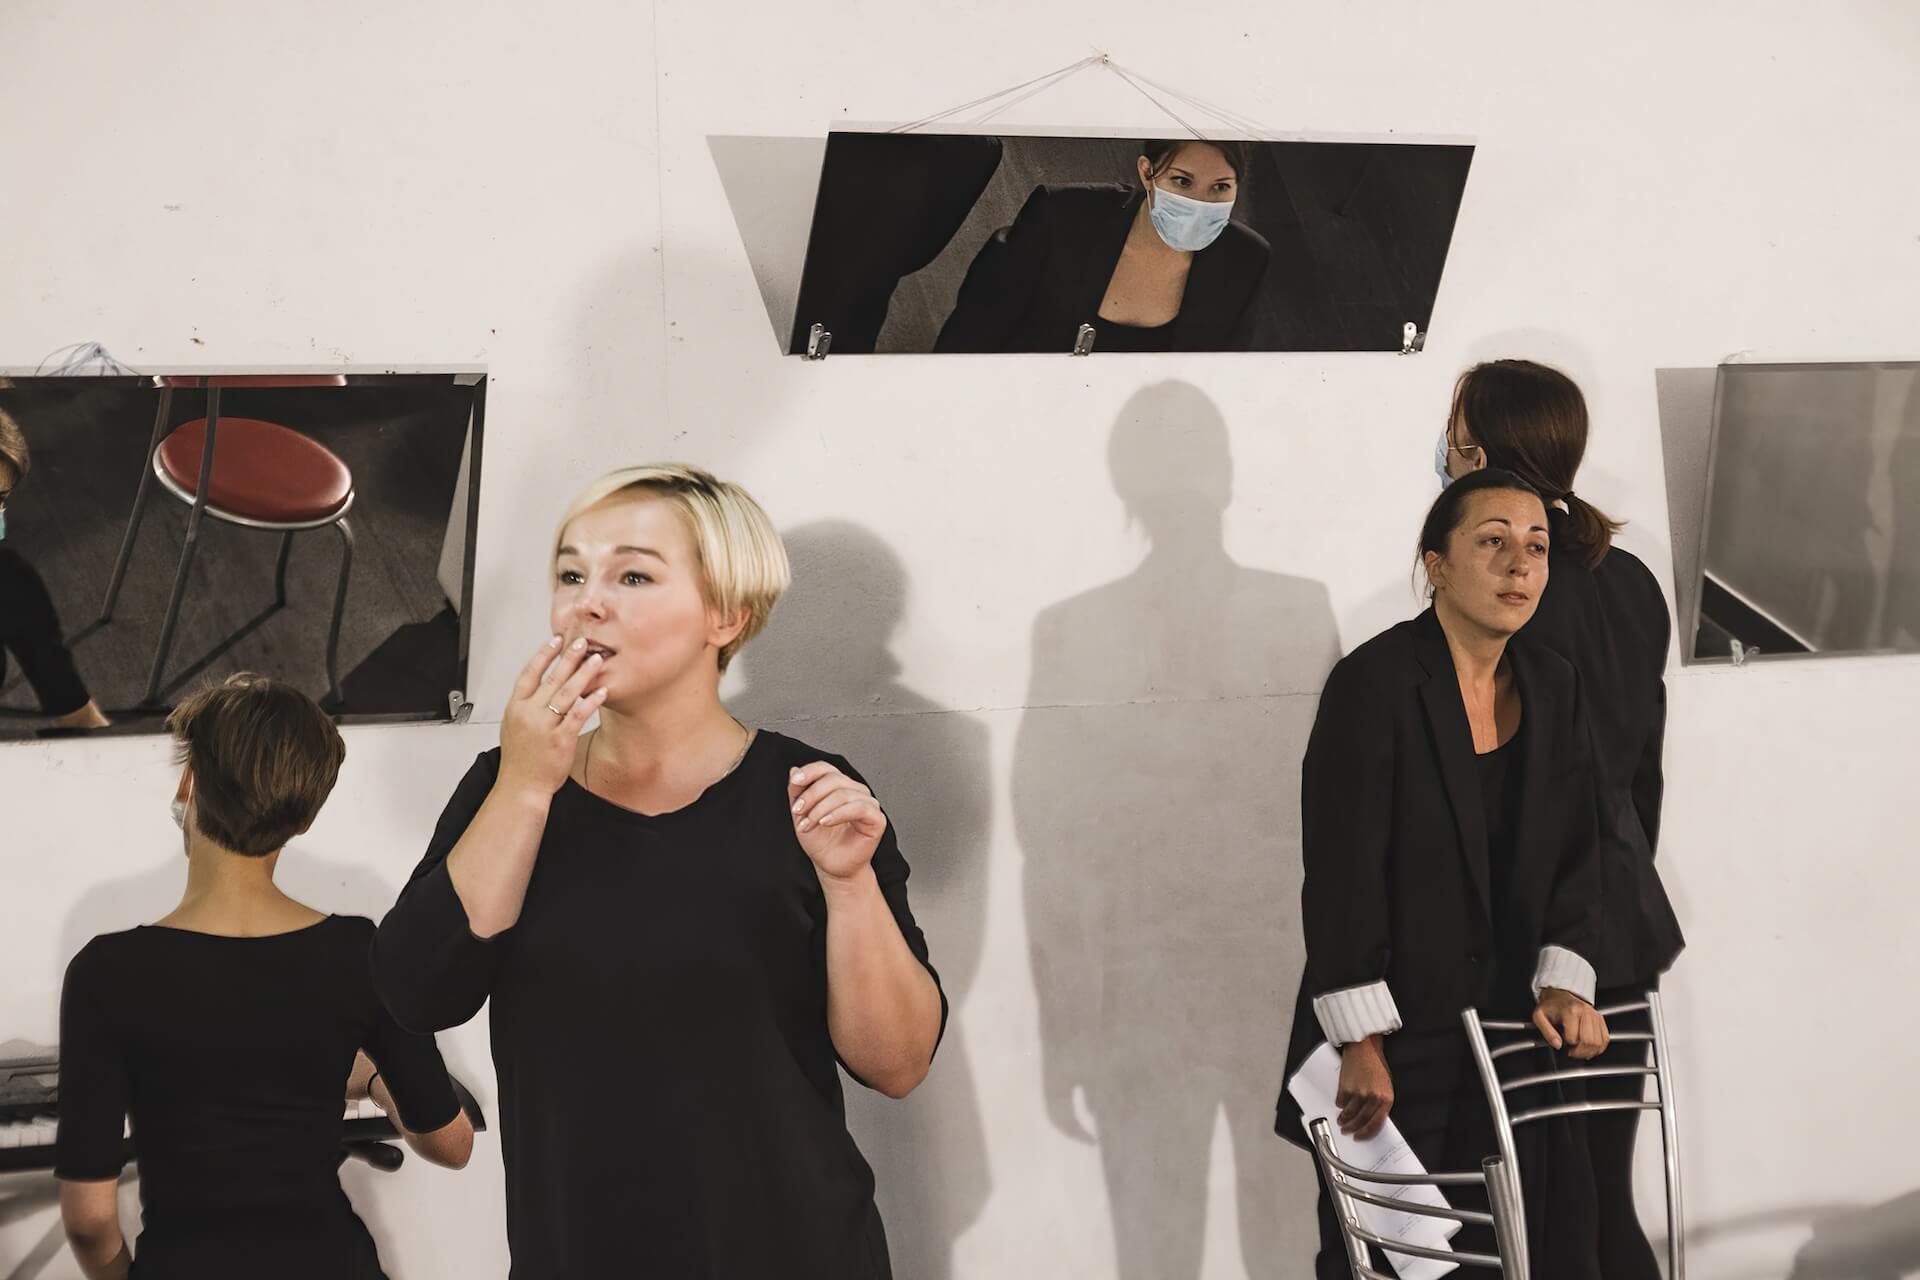 There are four performers wearing black suits in a room with three mirrors hanging by the wall. One is sitting in front of one of the mirrors wearing a disposable mask. Another one is standing in the middle wearing a disposable mask. Another one is standing behind a chair, holding a script. Another one looking at the front with their hand on the mouth.